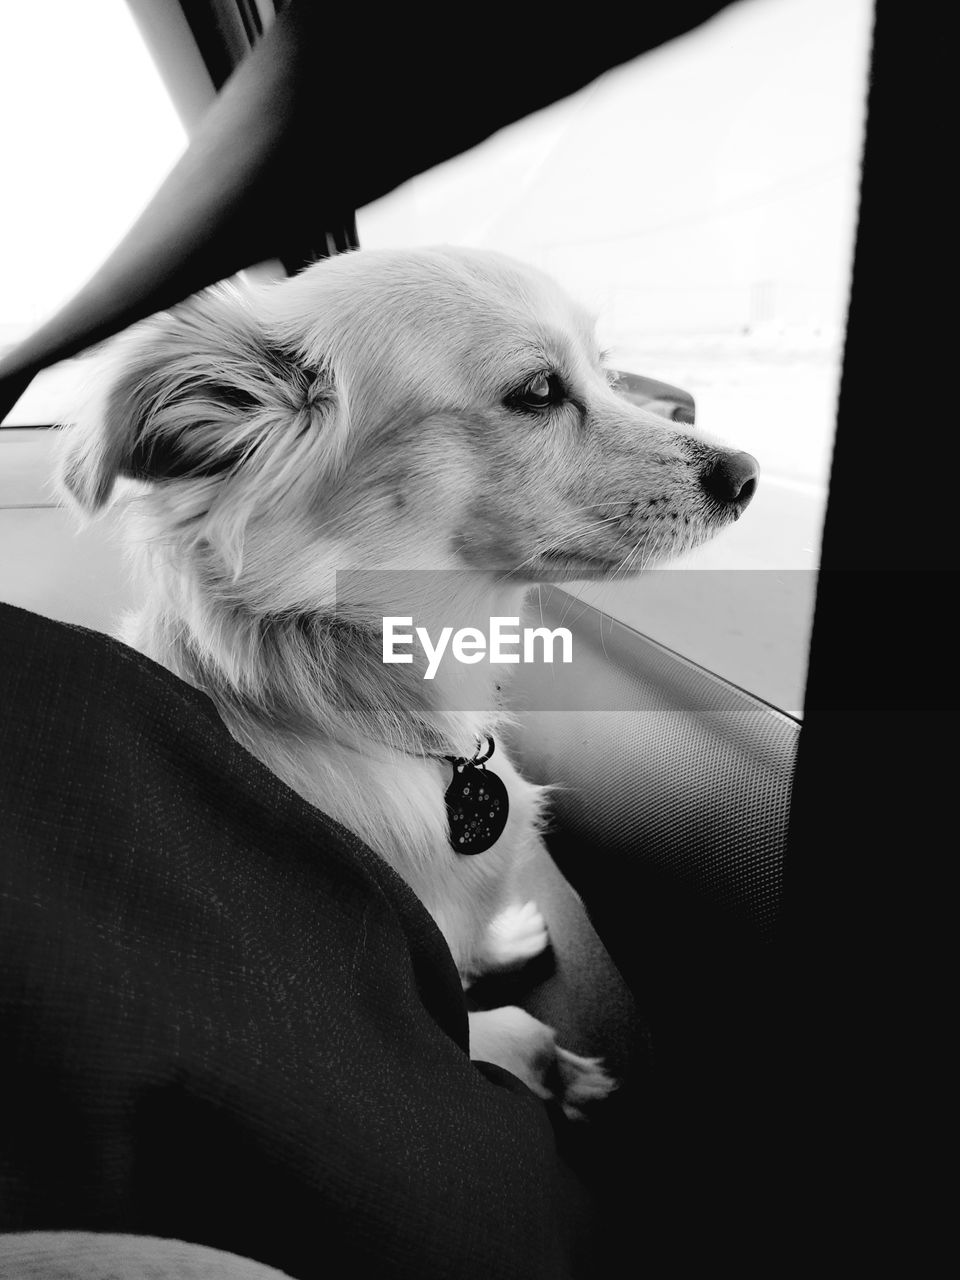 pet, domestic animals, one animal, mammal, animal themes, canine, dog, animal, white, black, black and white, monochrome, monochrome photography, indoors, vehicle interior, mode of transportation, looking, car, car interior, puppy, transportation, motor vehicle, window, looking away, sitting, no people, chihuahua, lap dog, day